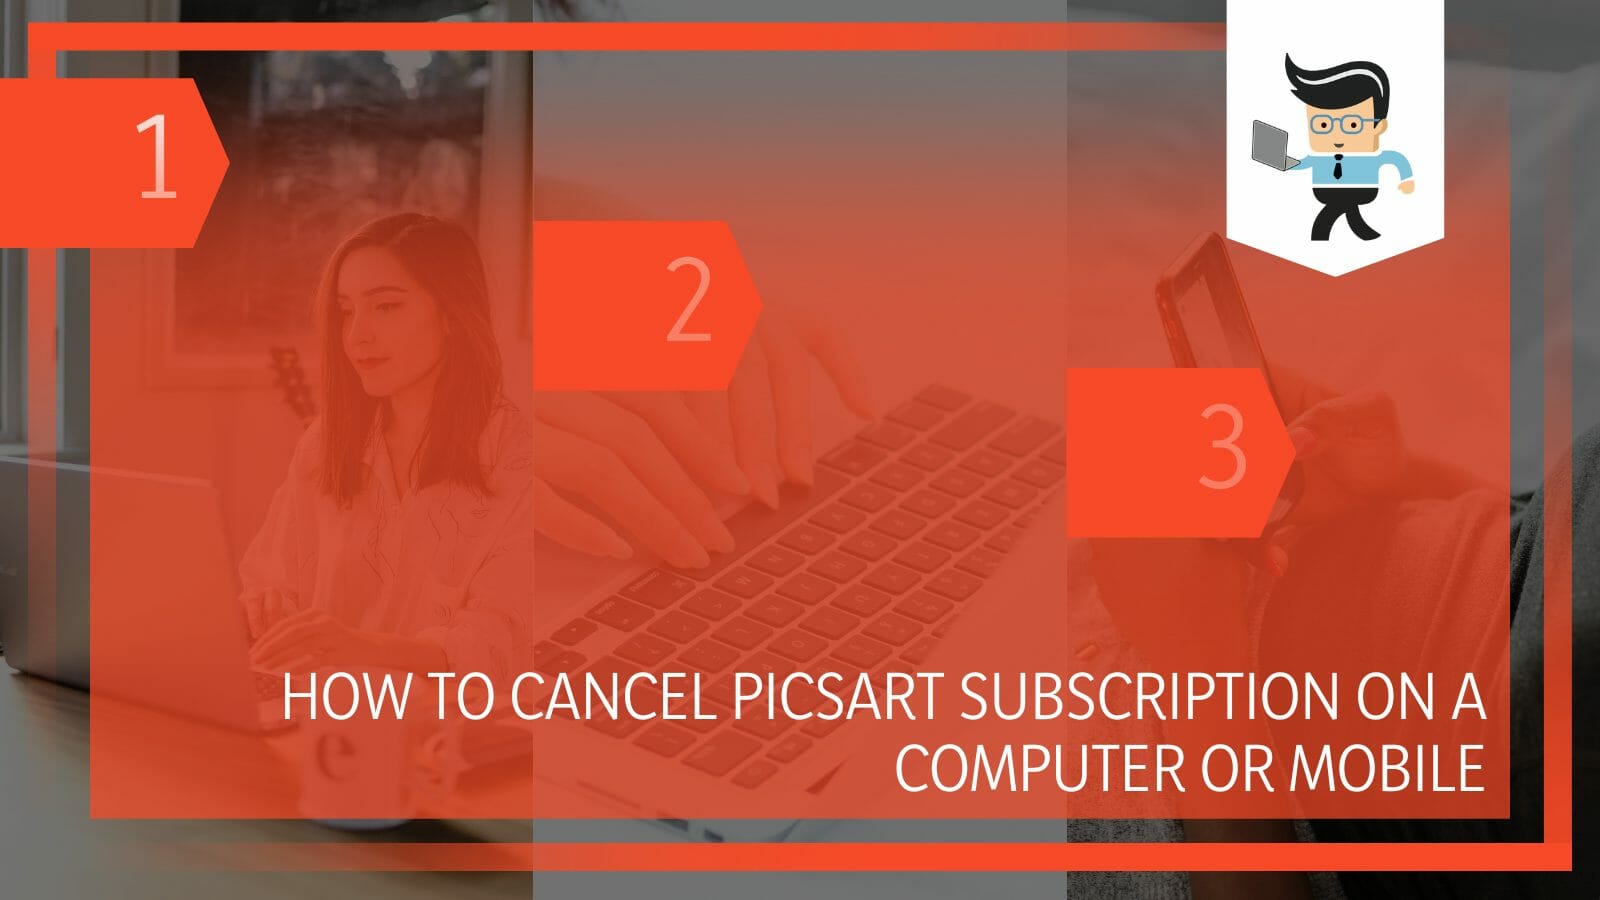 Cancel Picsart Subscription on a Computer or Mobile